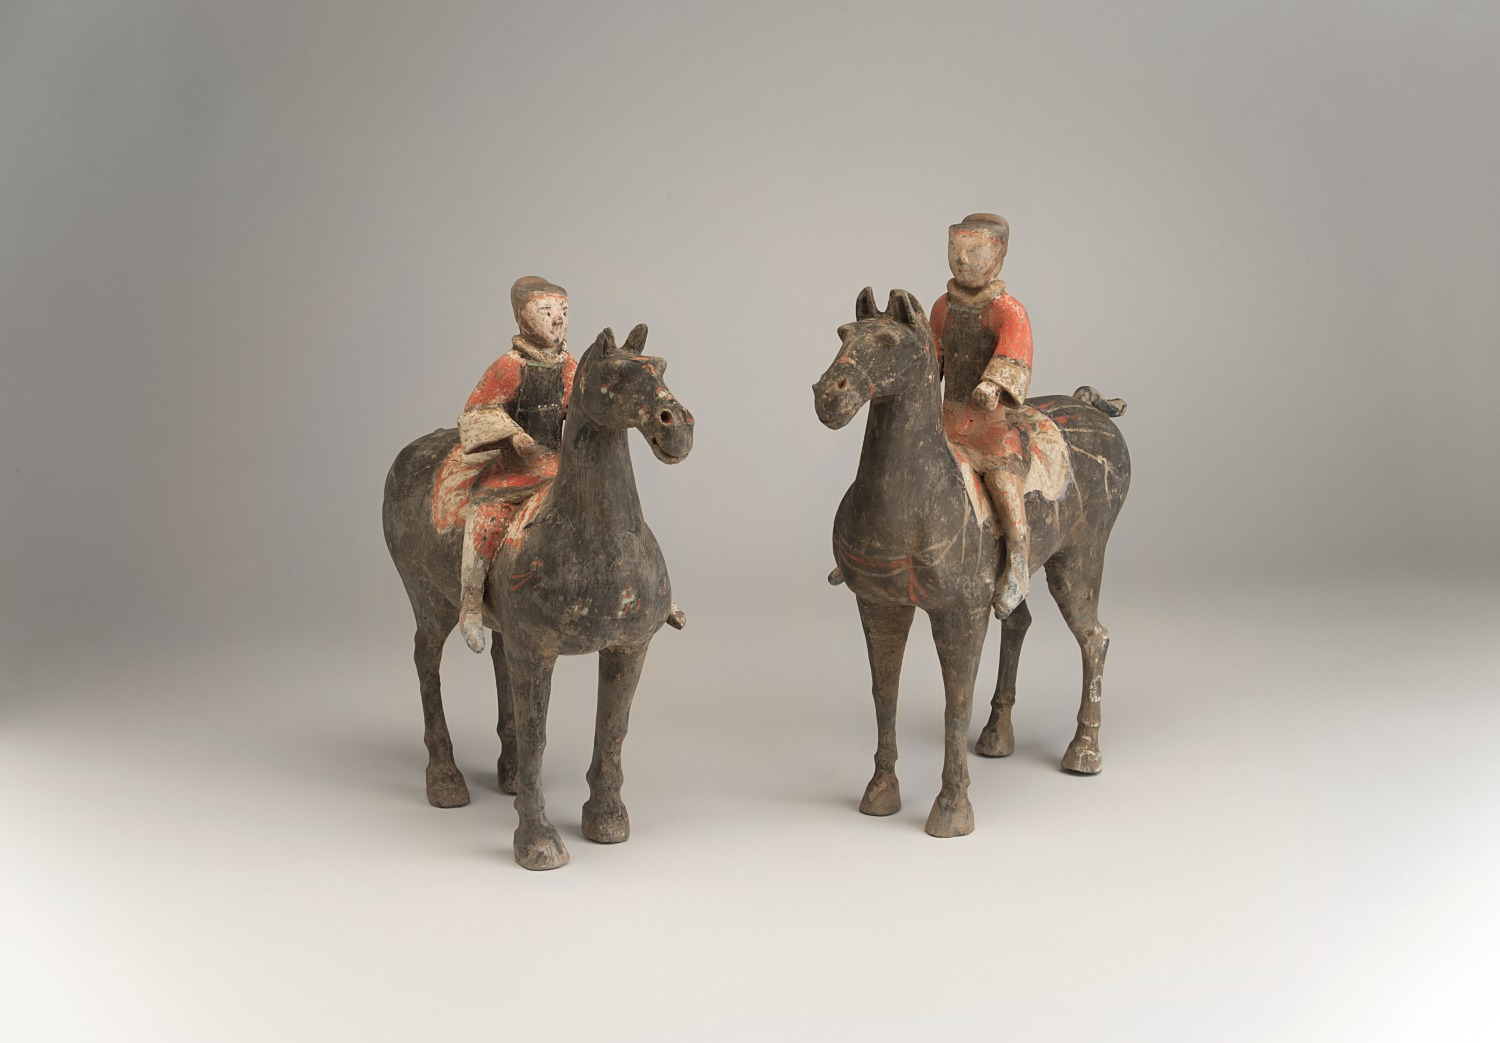 Unknown, Pair of painted equestrian funerary figures, Han dynasty, 206 B.C.-220 A.D. Painted clay. Gift of Drs. Thomas and Martha Carter.